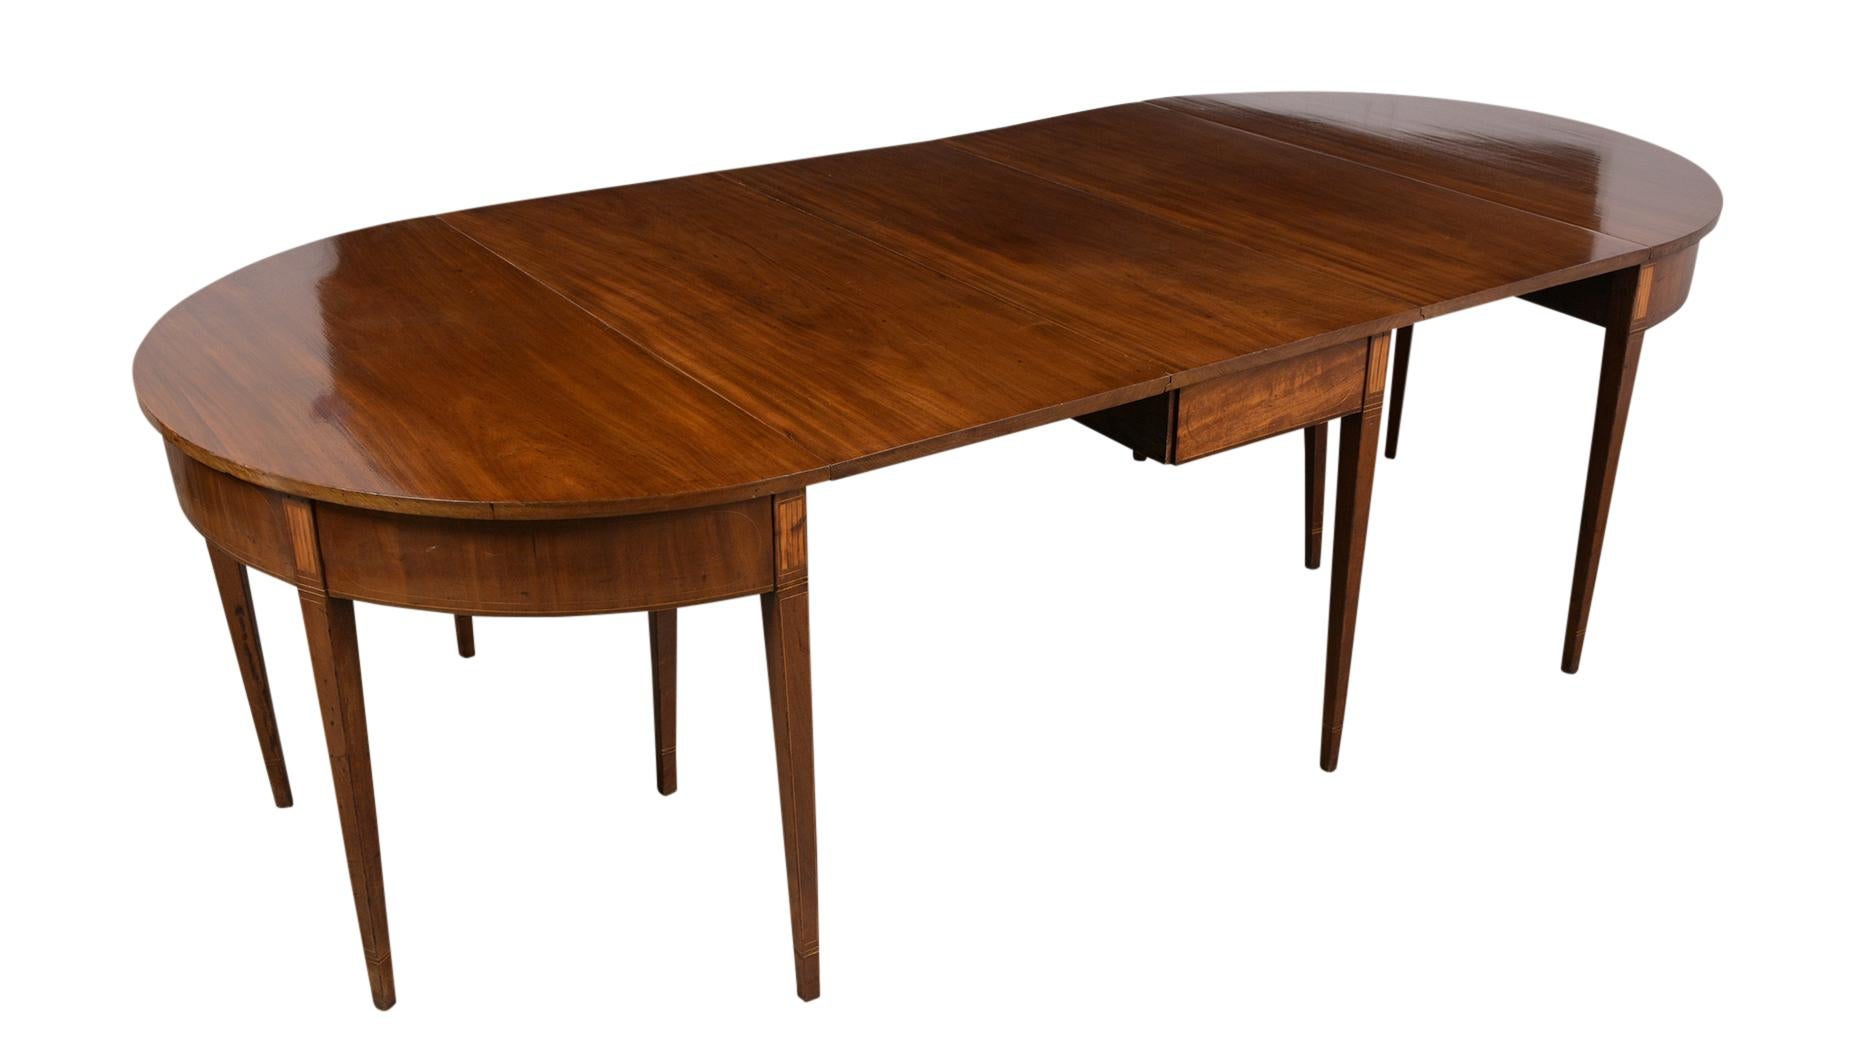 This Late 18th Century Federal Extendable Oval Dining Table is in good condition, can be arranged as a roundtable and as end-tables. and features its original walnut stain and lustrous patina finish. The dining table is finished with tapered legs